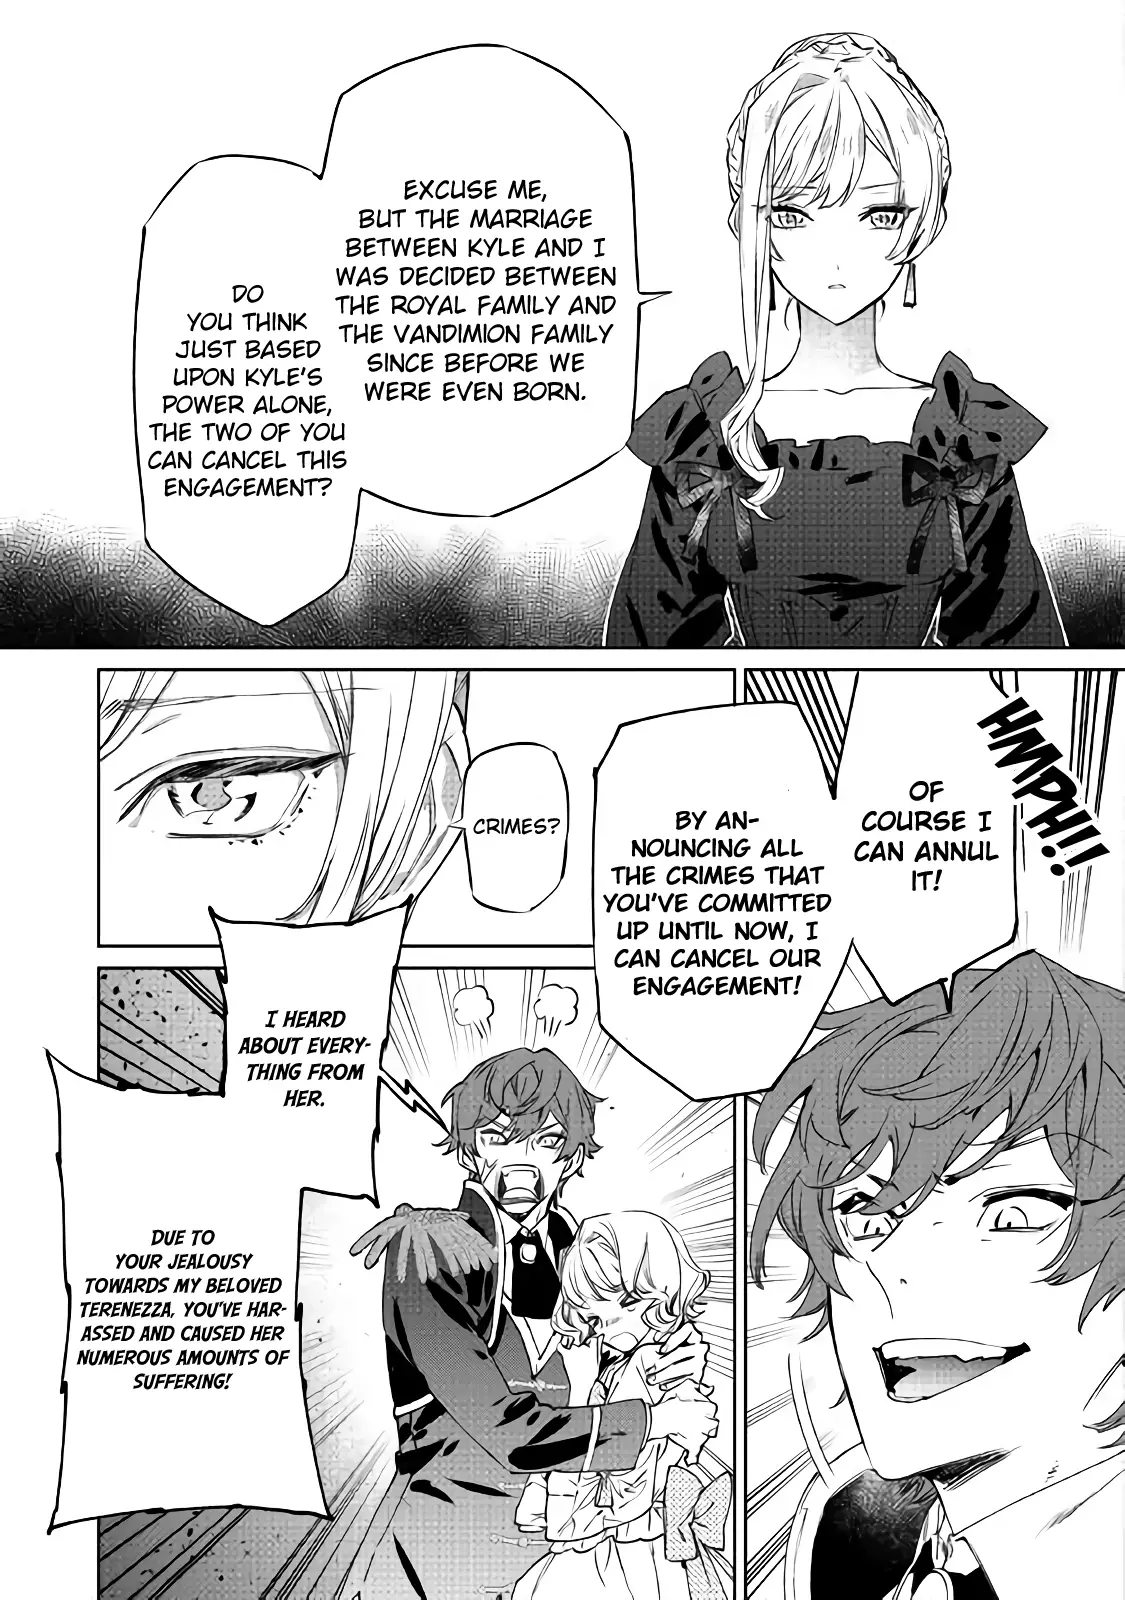 May I Please Ask You Just One Last Thing? - 1 page 13